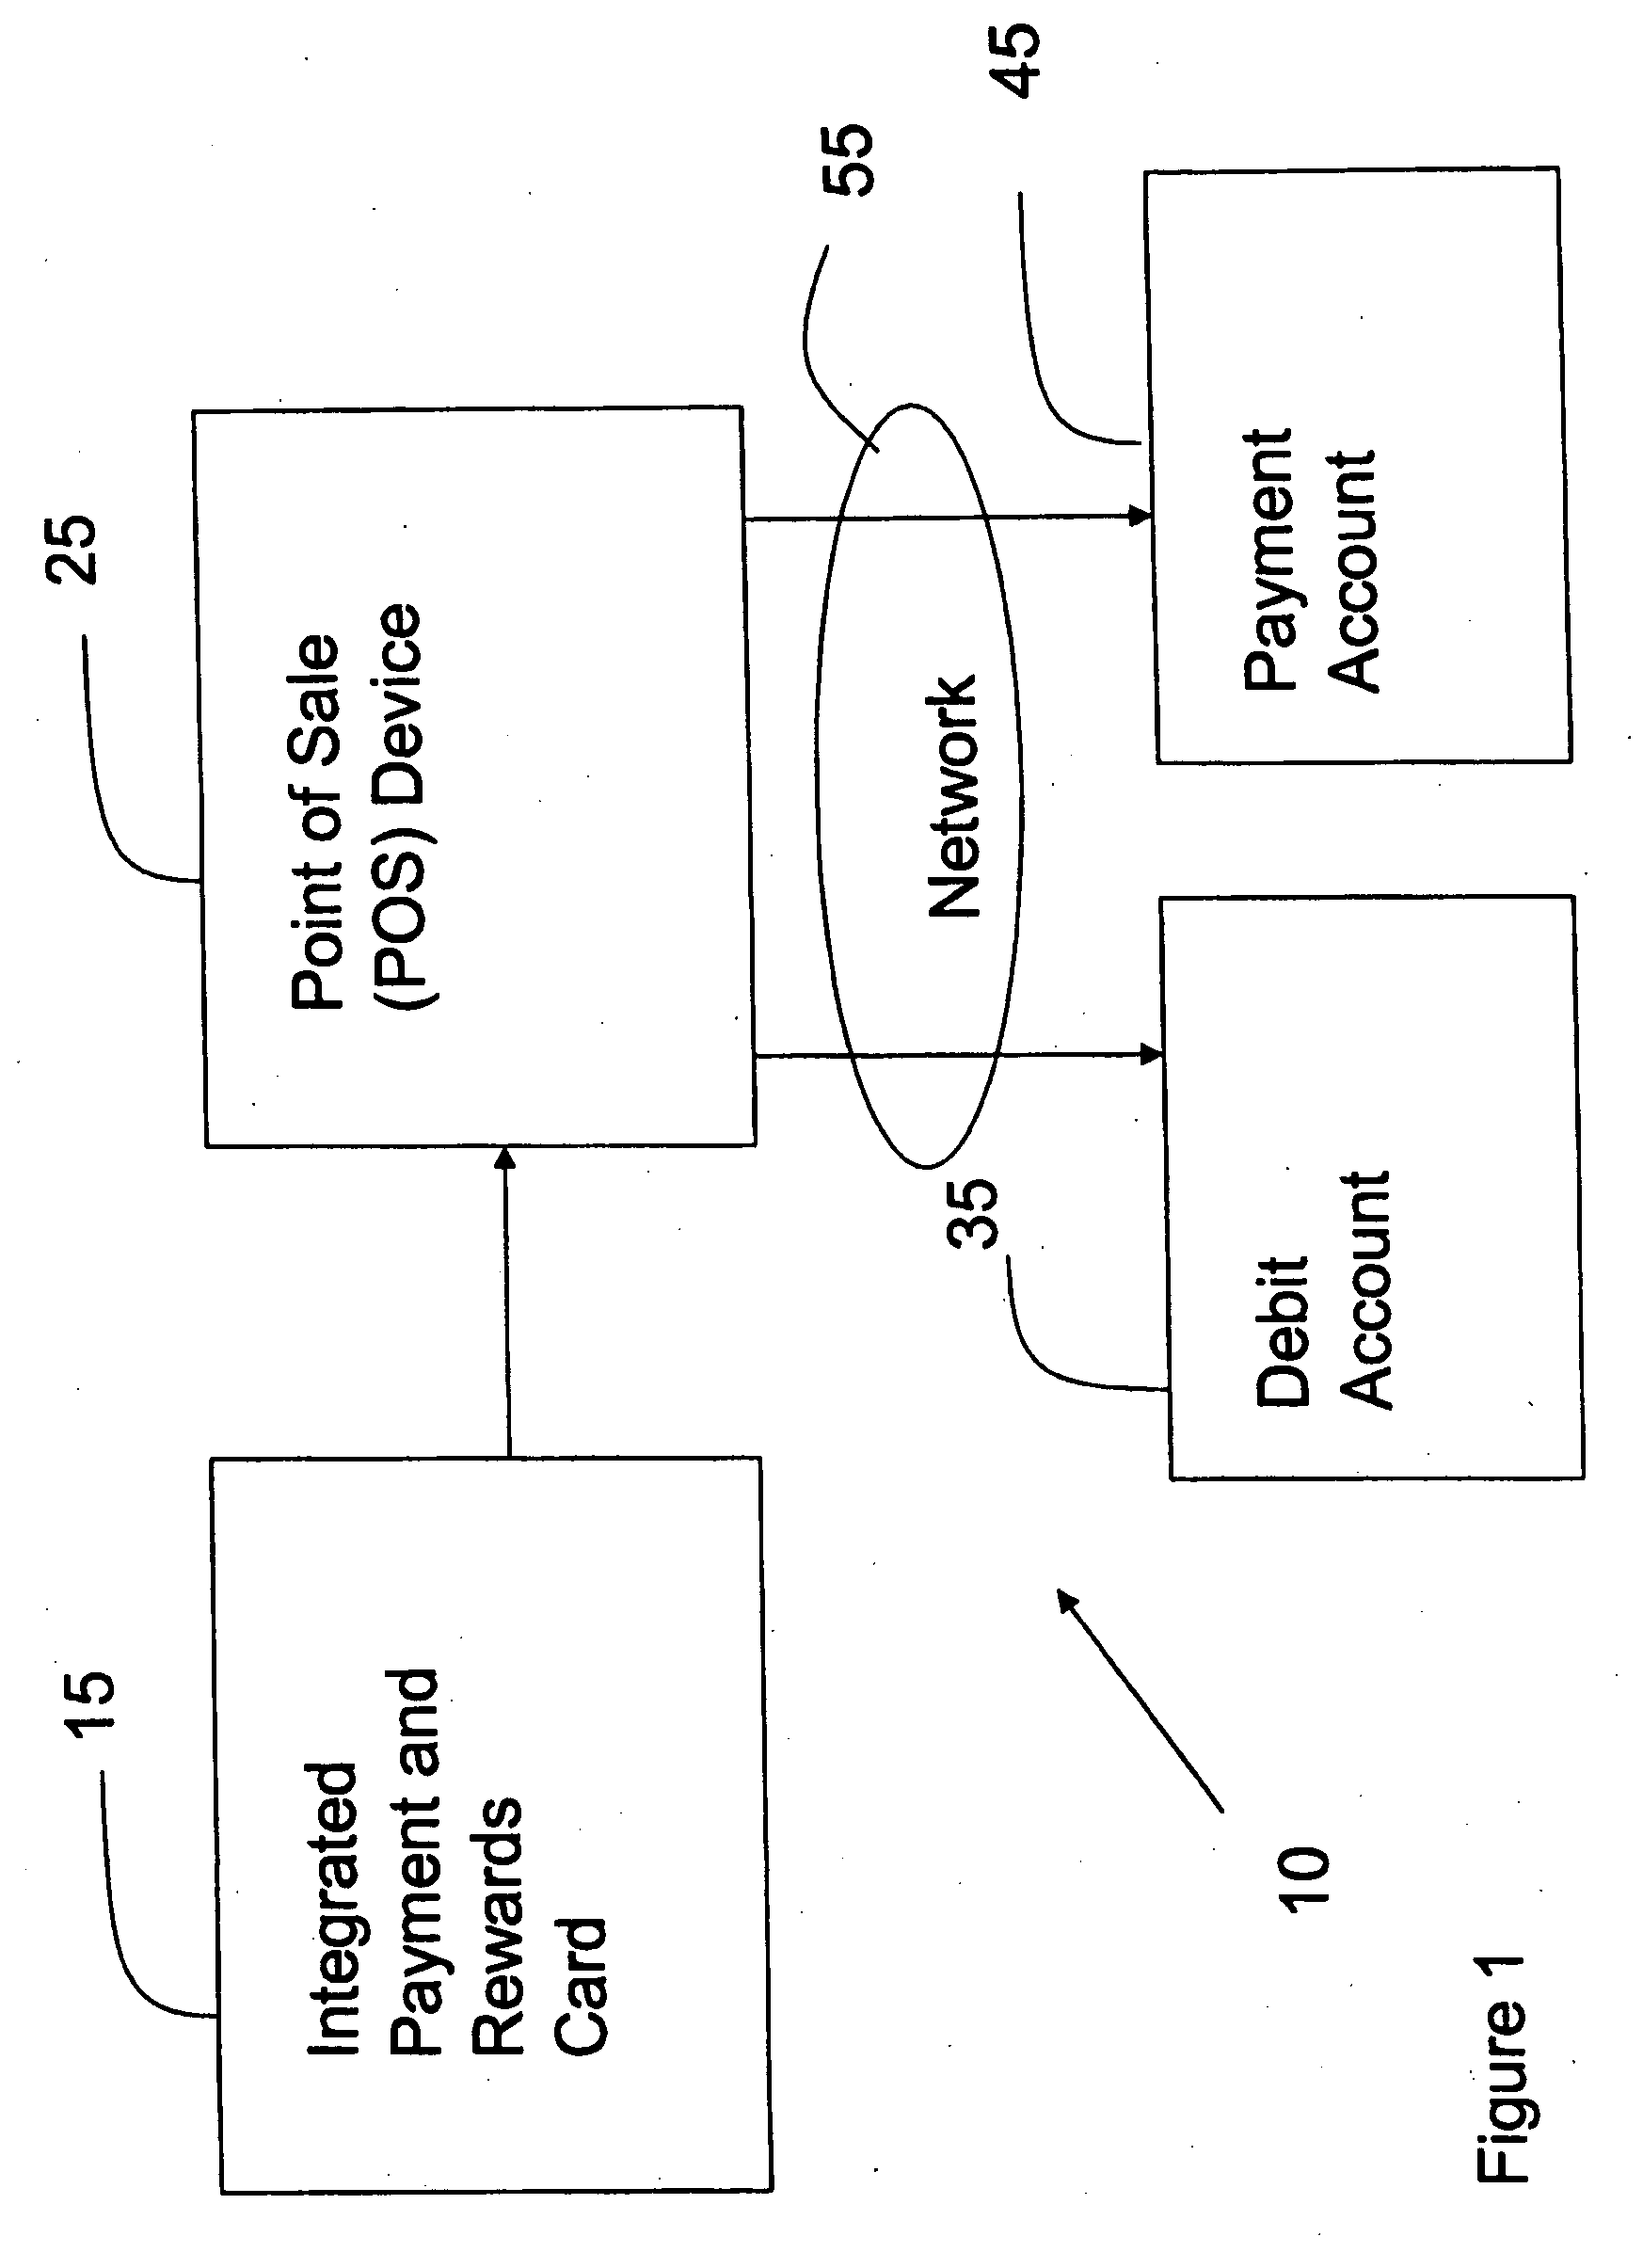 System and method for an integrated payment and reward card